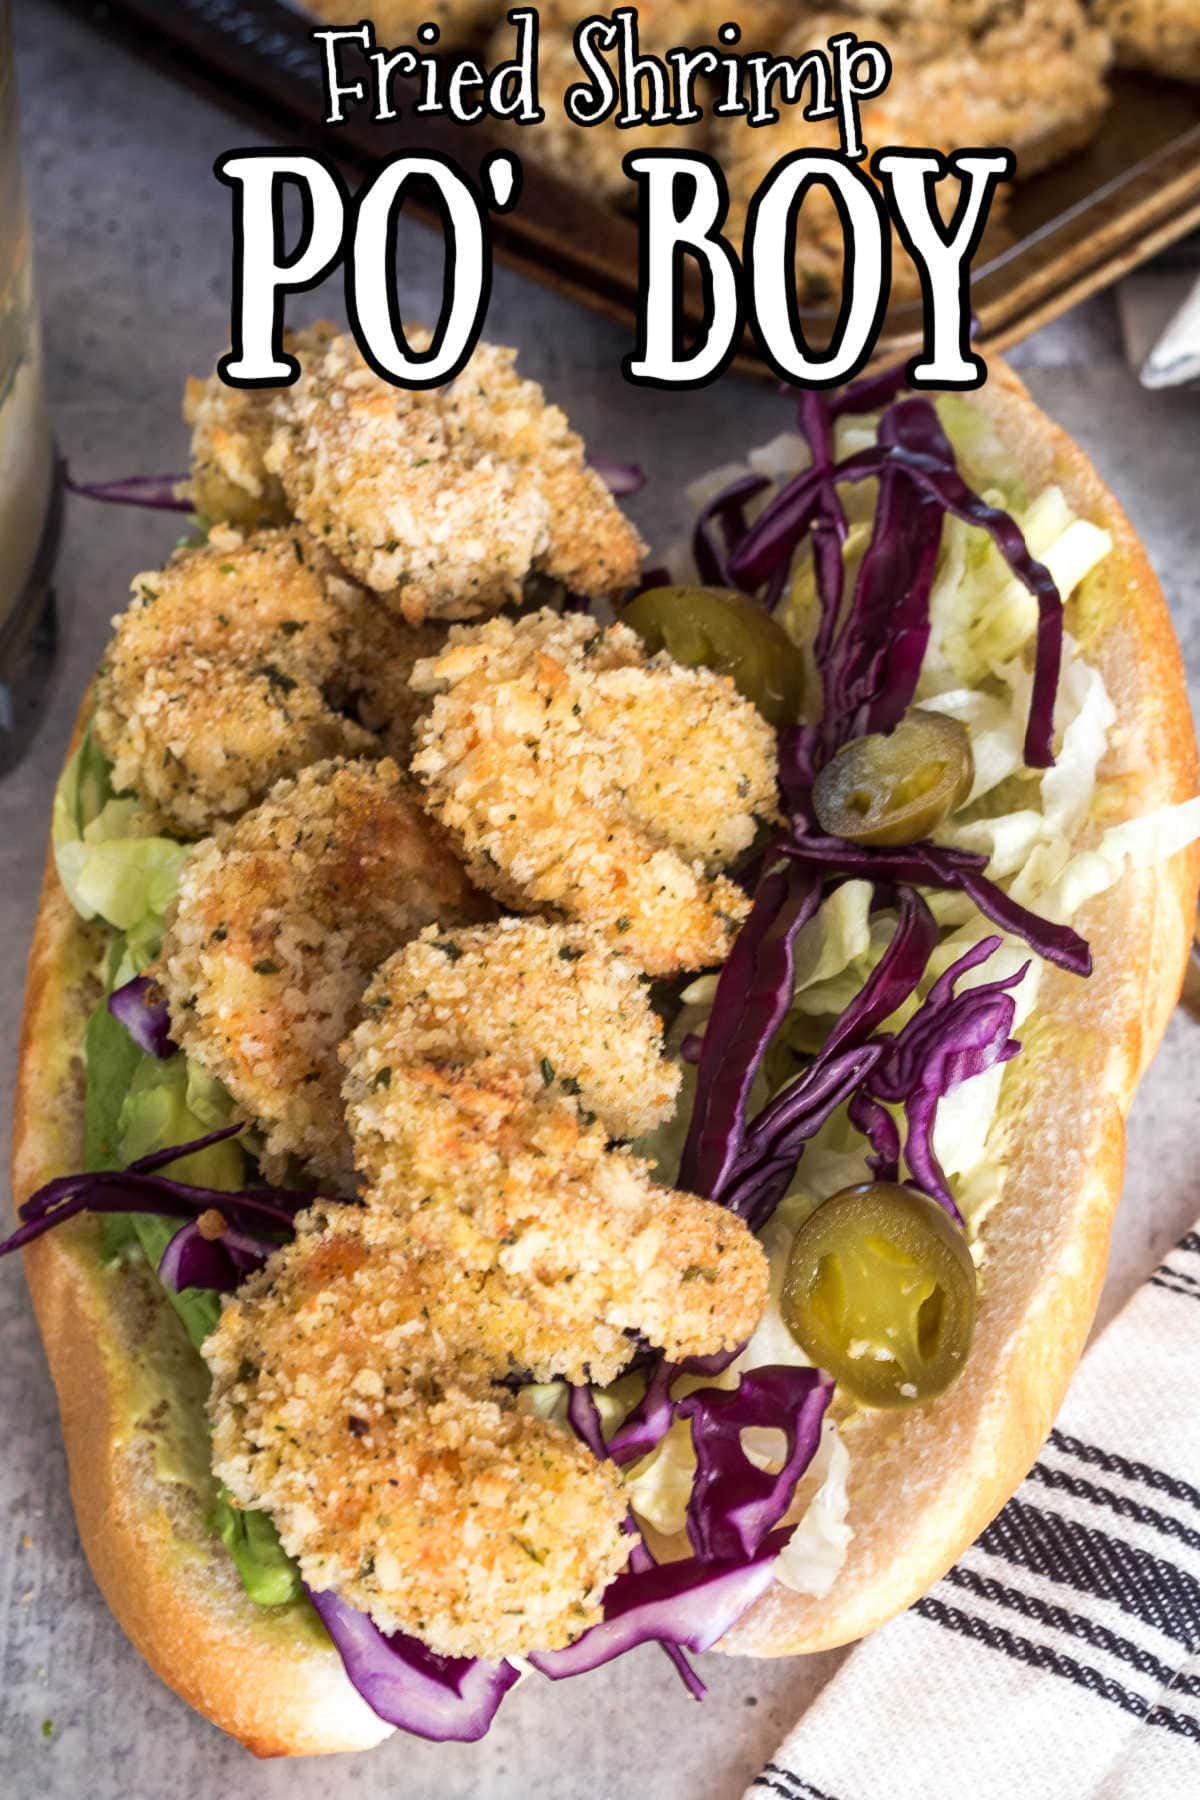 Overhead view of po' boy sandwich with title text overlay.